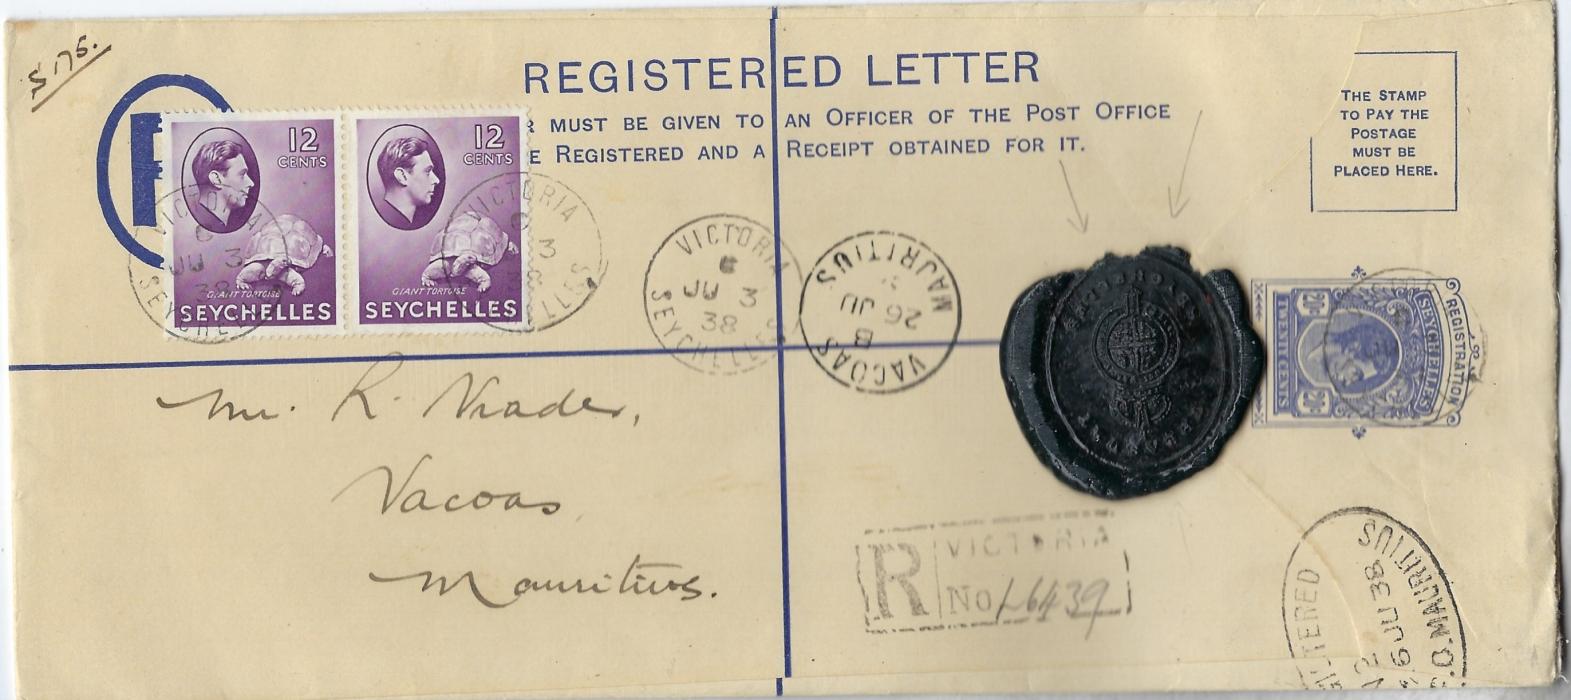 Seychelles 1938 (JU 3) 20c KGVI postal stationery registration envelope, size H2, to Vacoas, Mauritius additionally franked pair 12c. Giant tortoise tied Victoria index c cds, central arrival cds, large part fine black wax seal of Treasury; fine and unfolded.